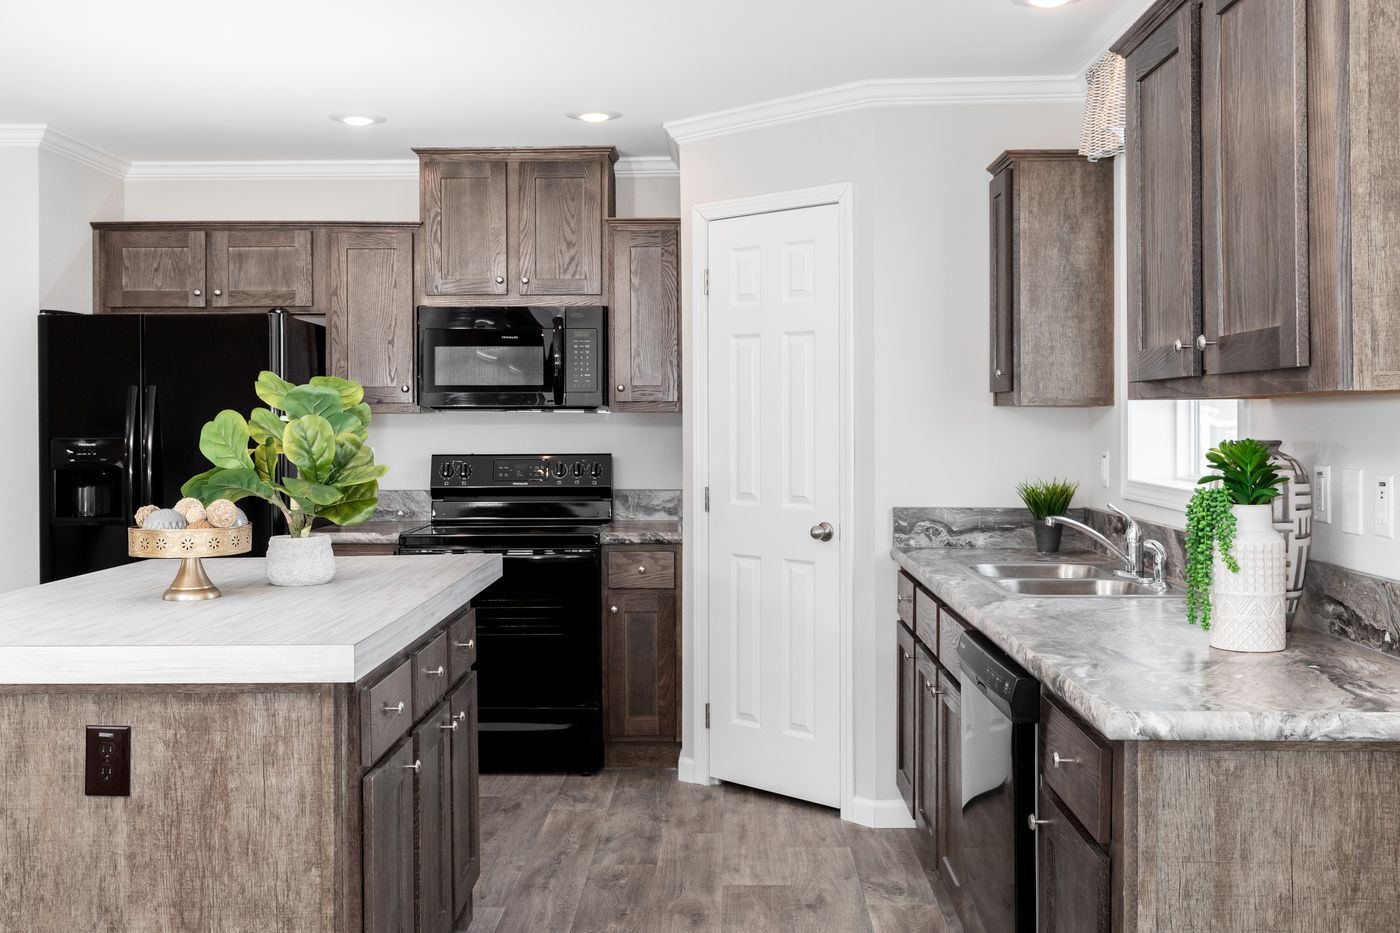 The THE VILLETTE Kitchen. This Manufactured Mobile Home features 3 bedrooms and 2 baths.